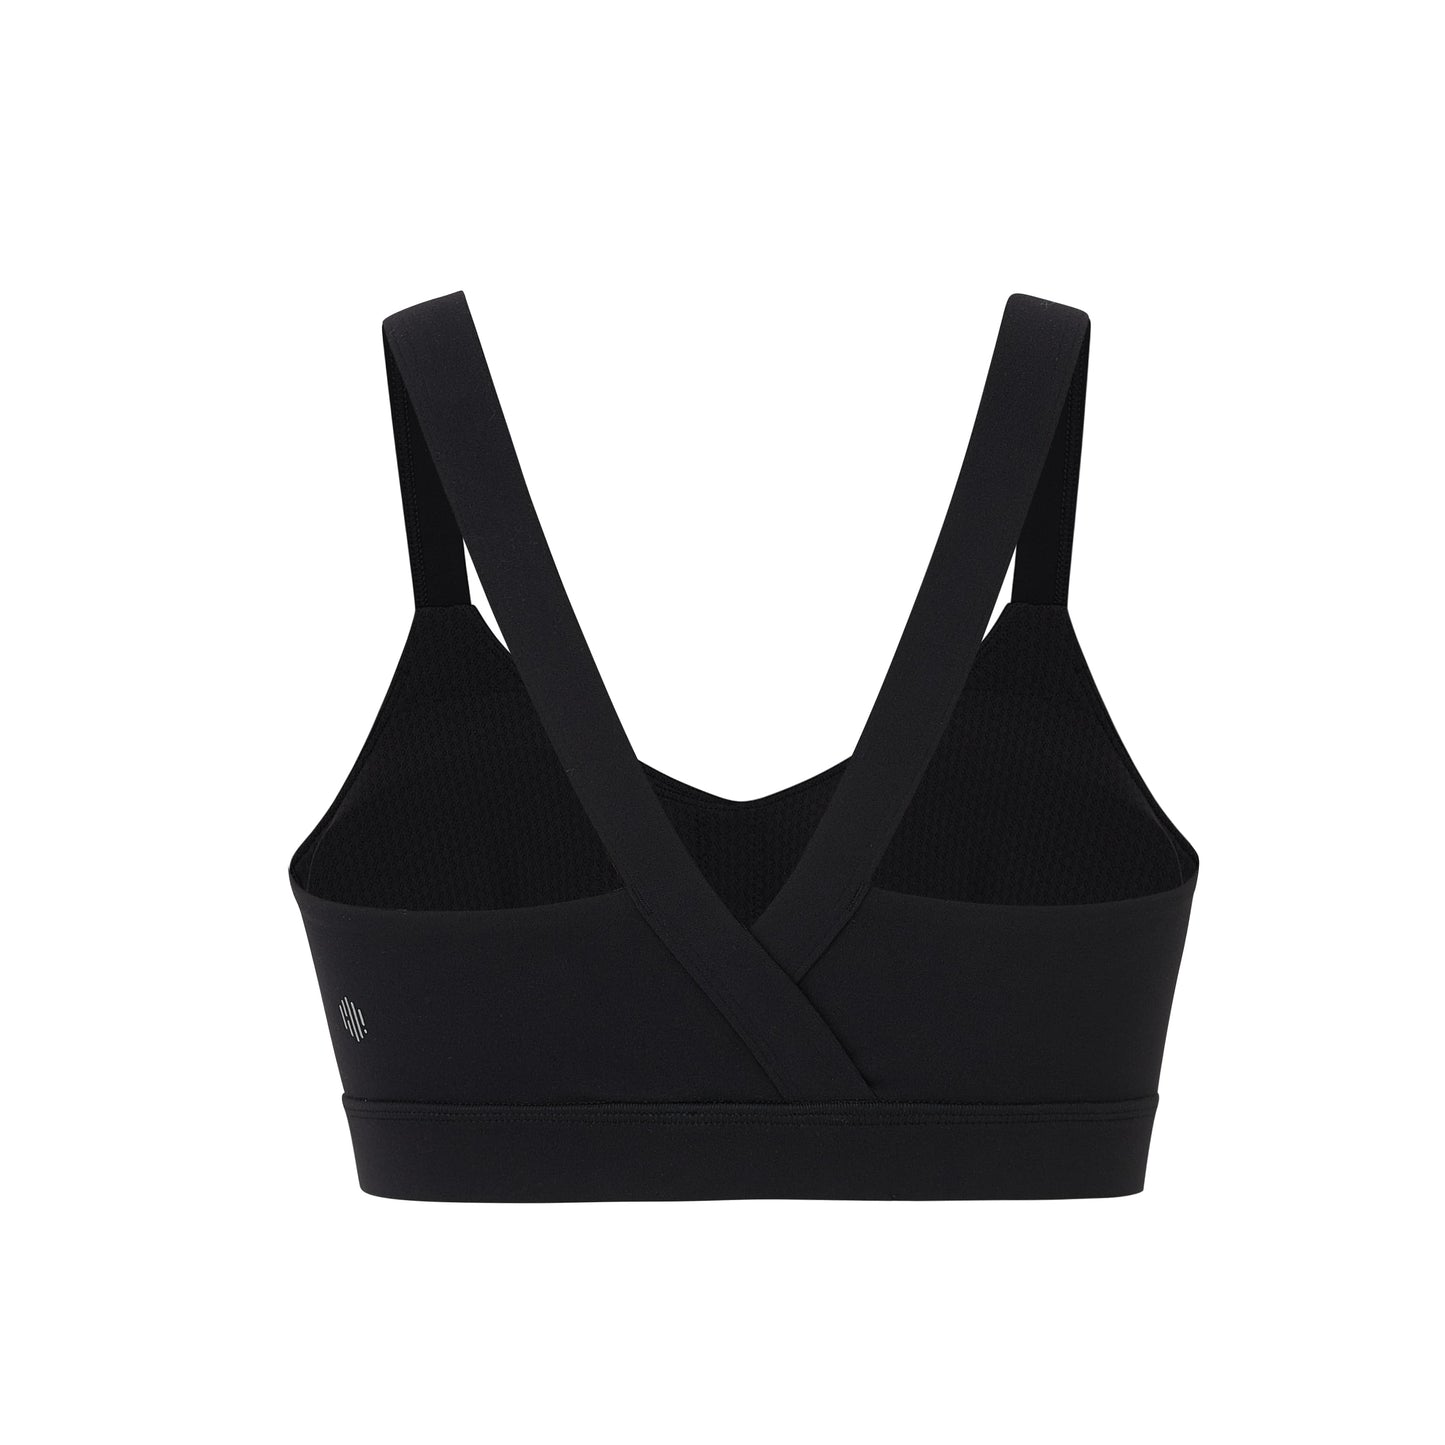 flat lay image of black sports bra from back